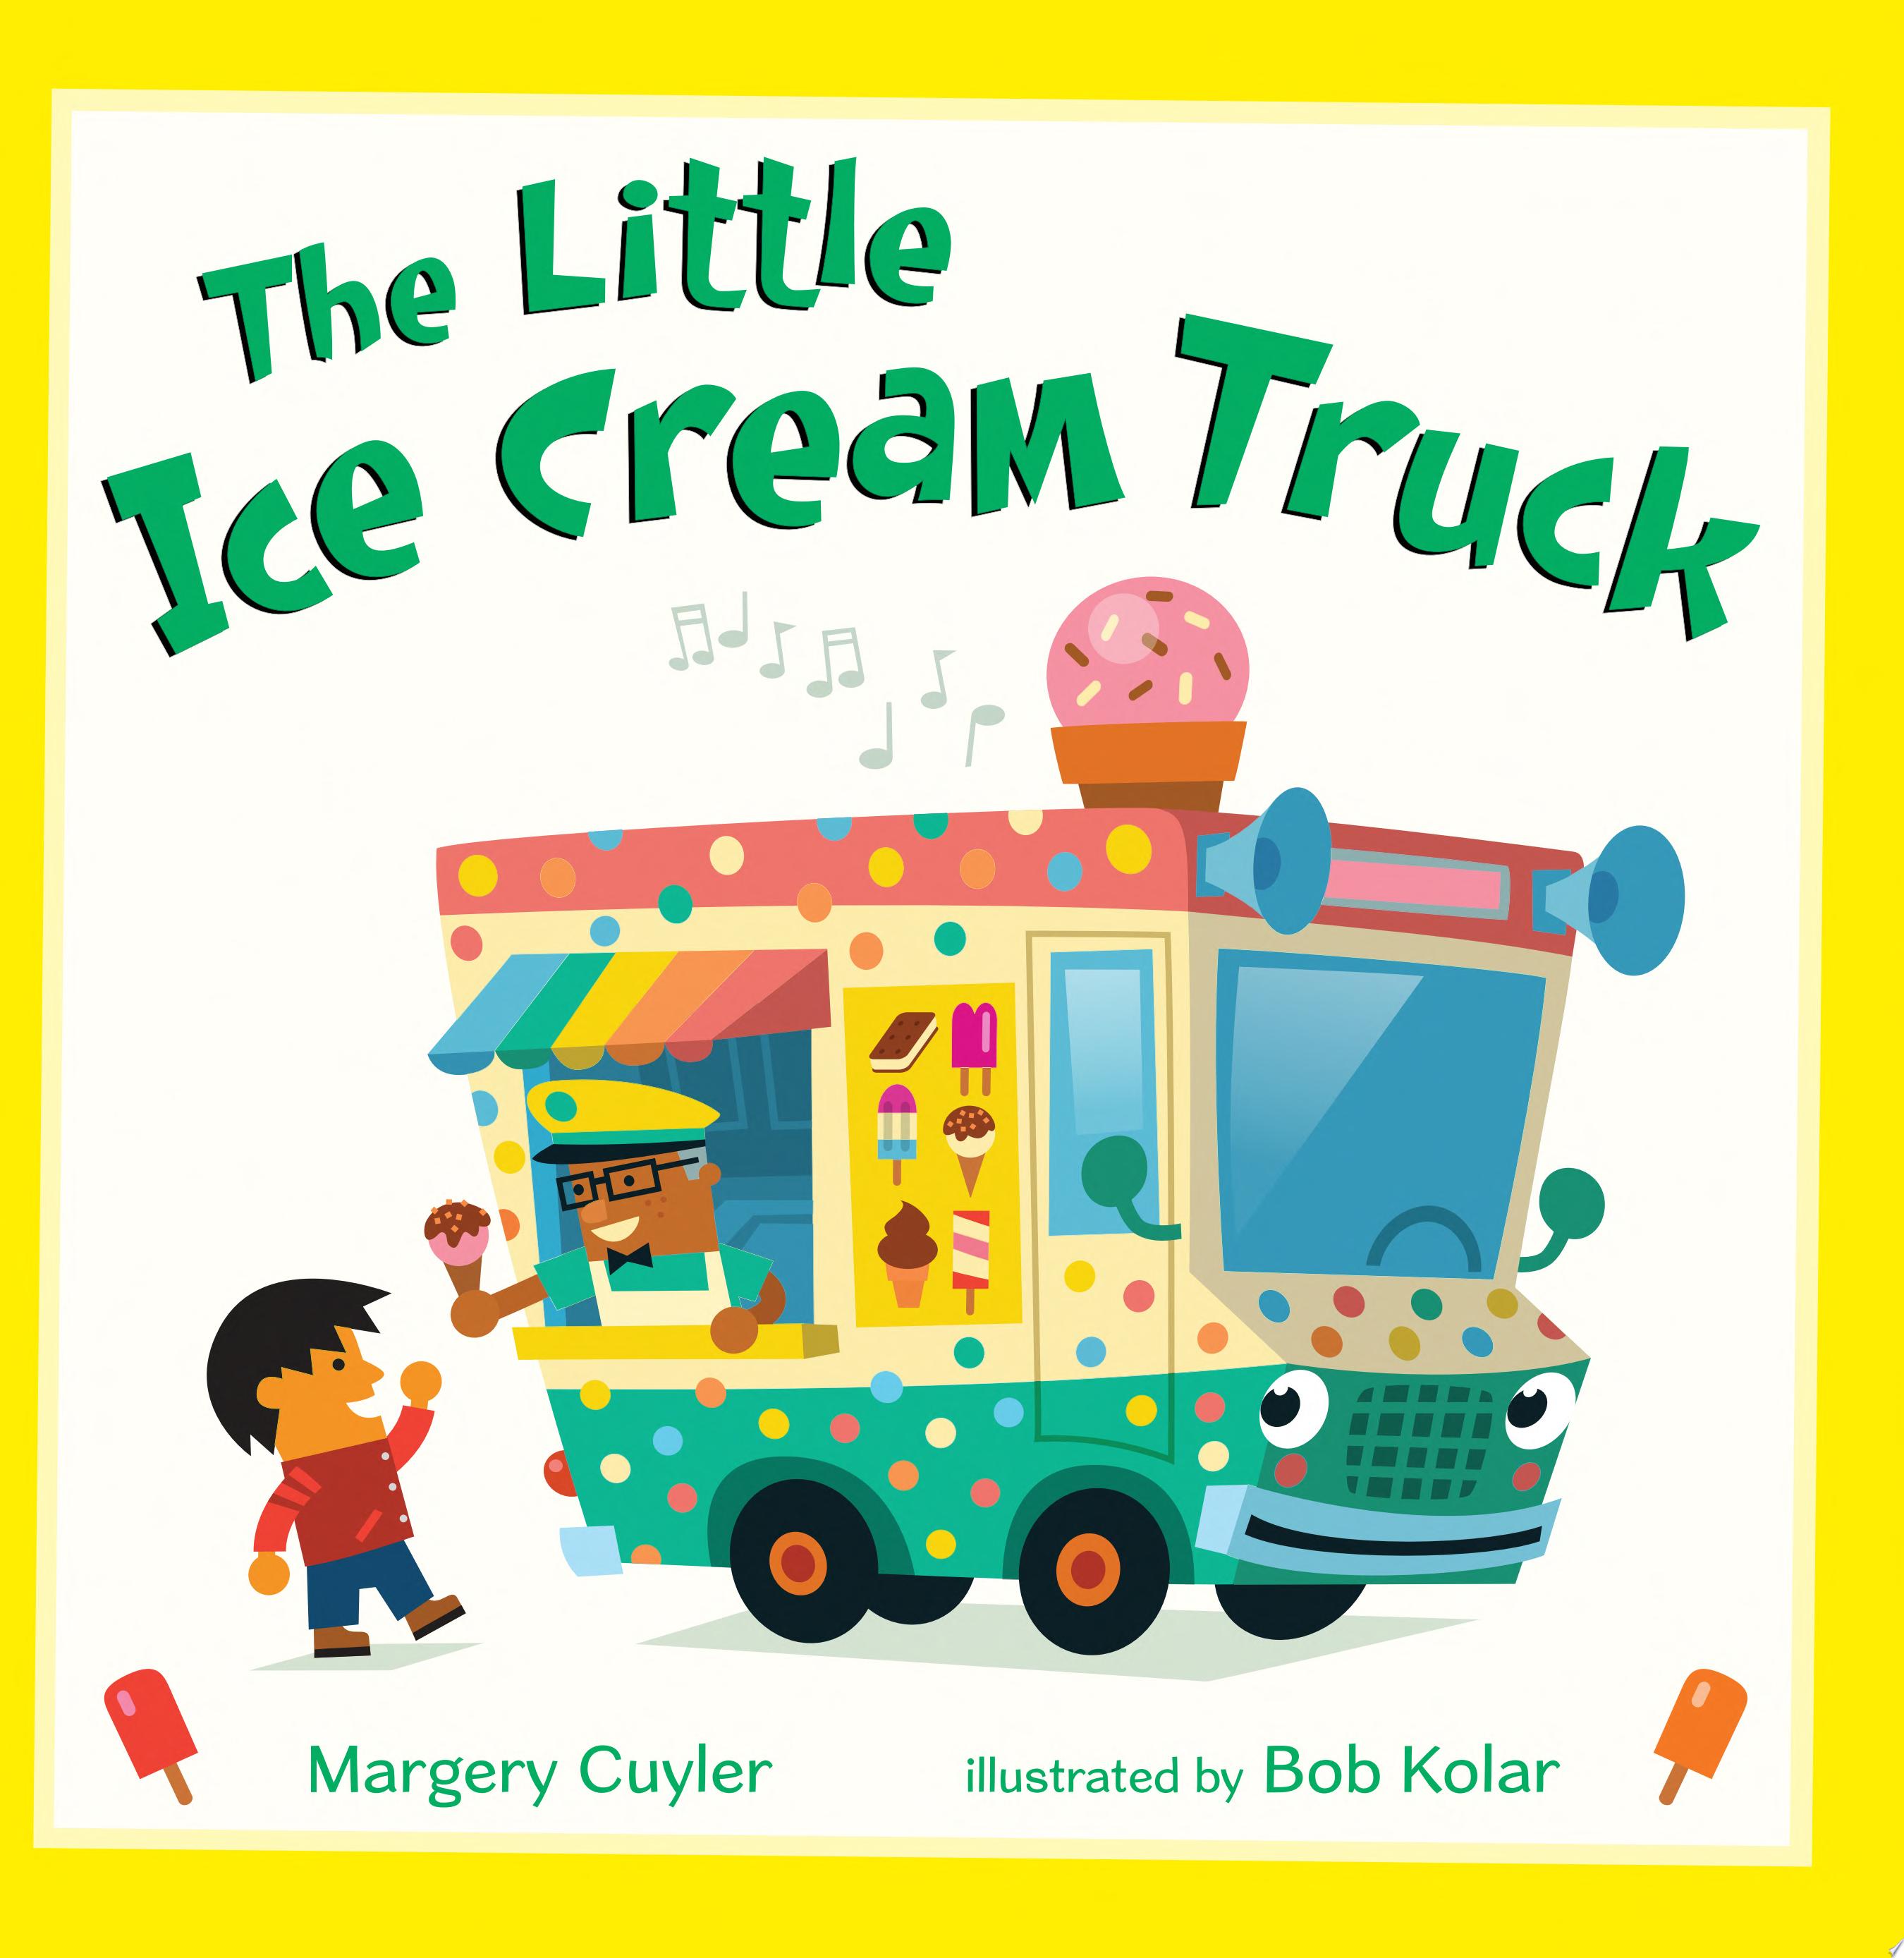 Image for "The Little Ice Cream Truck"